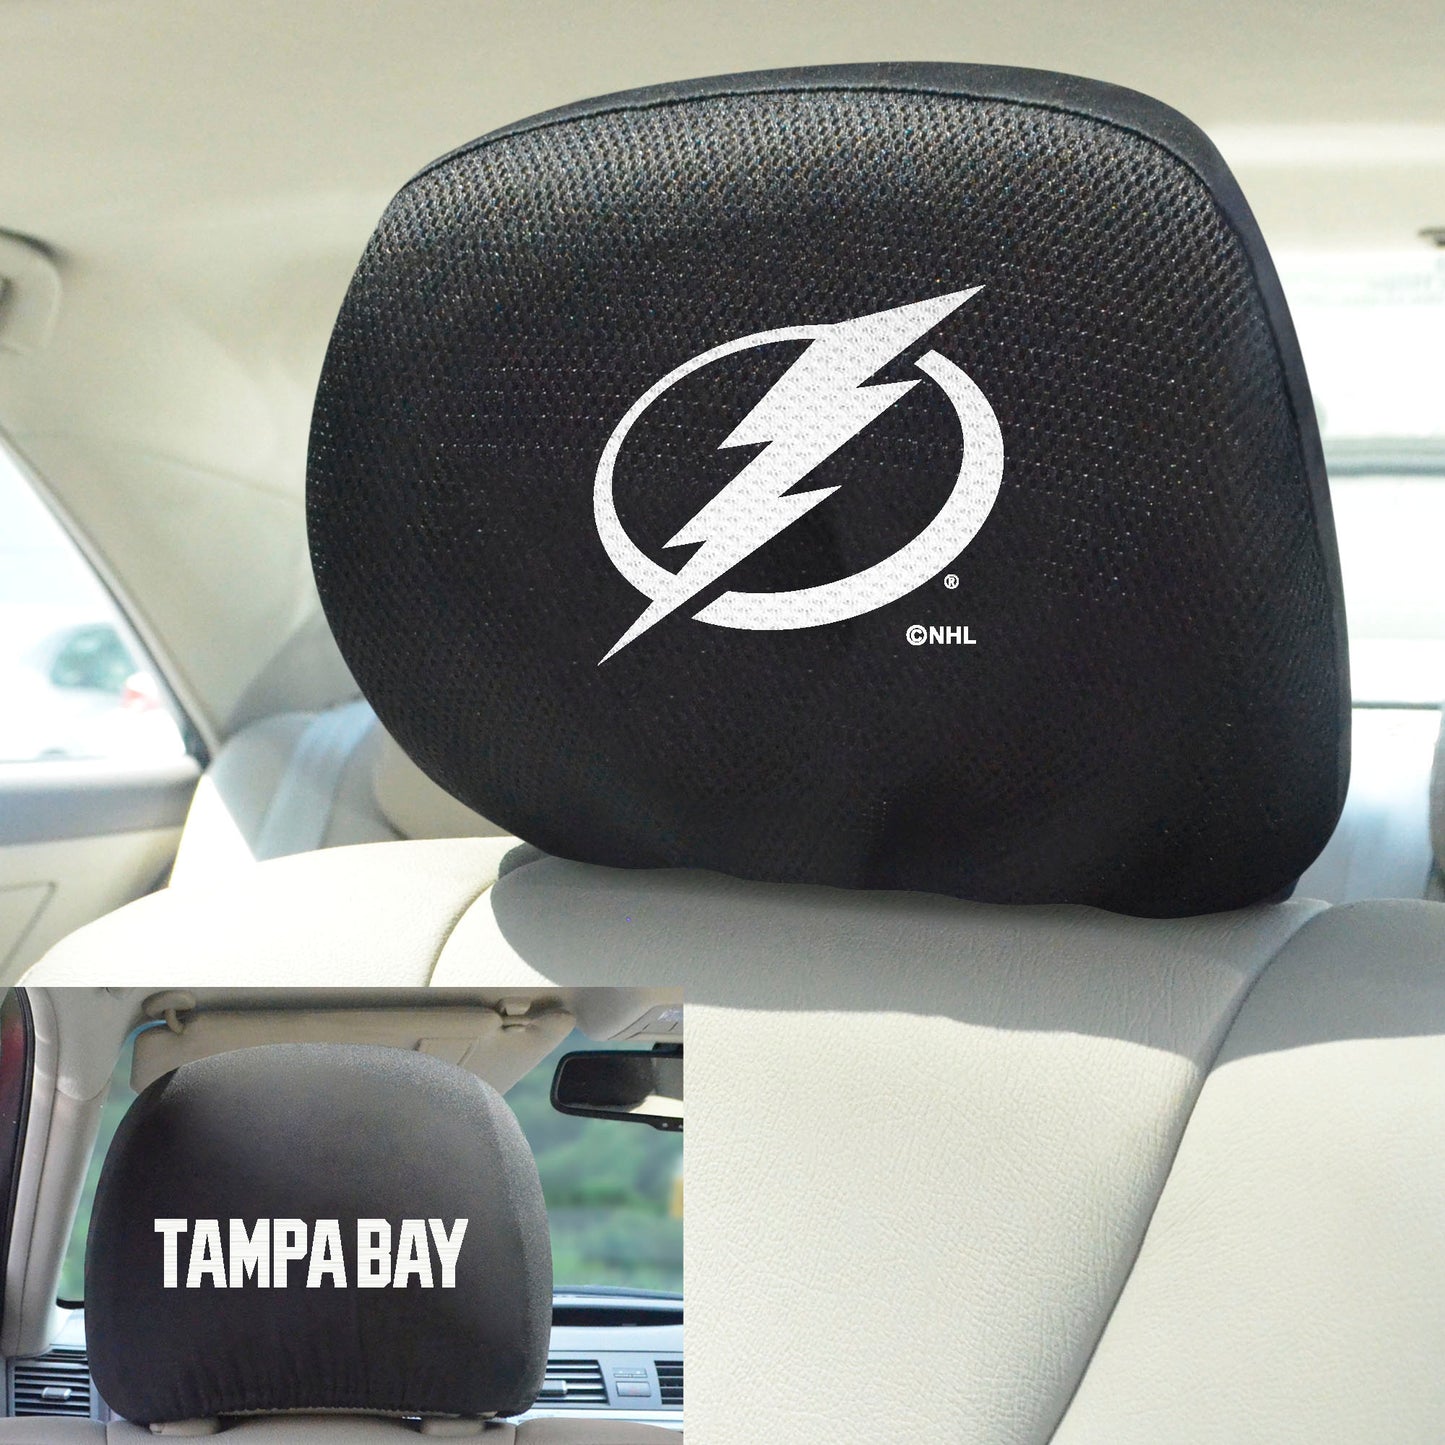 Tampa Bay Lightning Embroidered Head Rest Cover Set - 2 Pieces